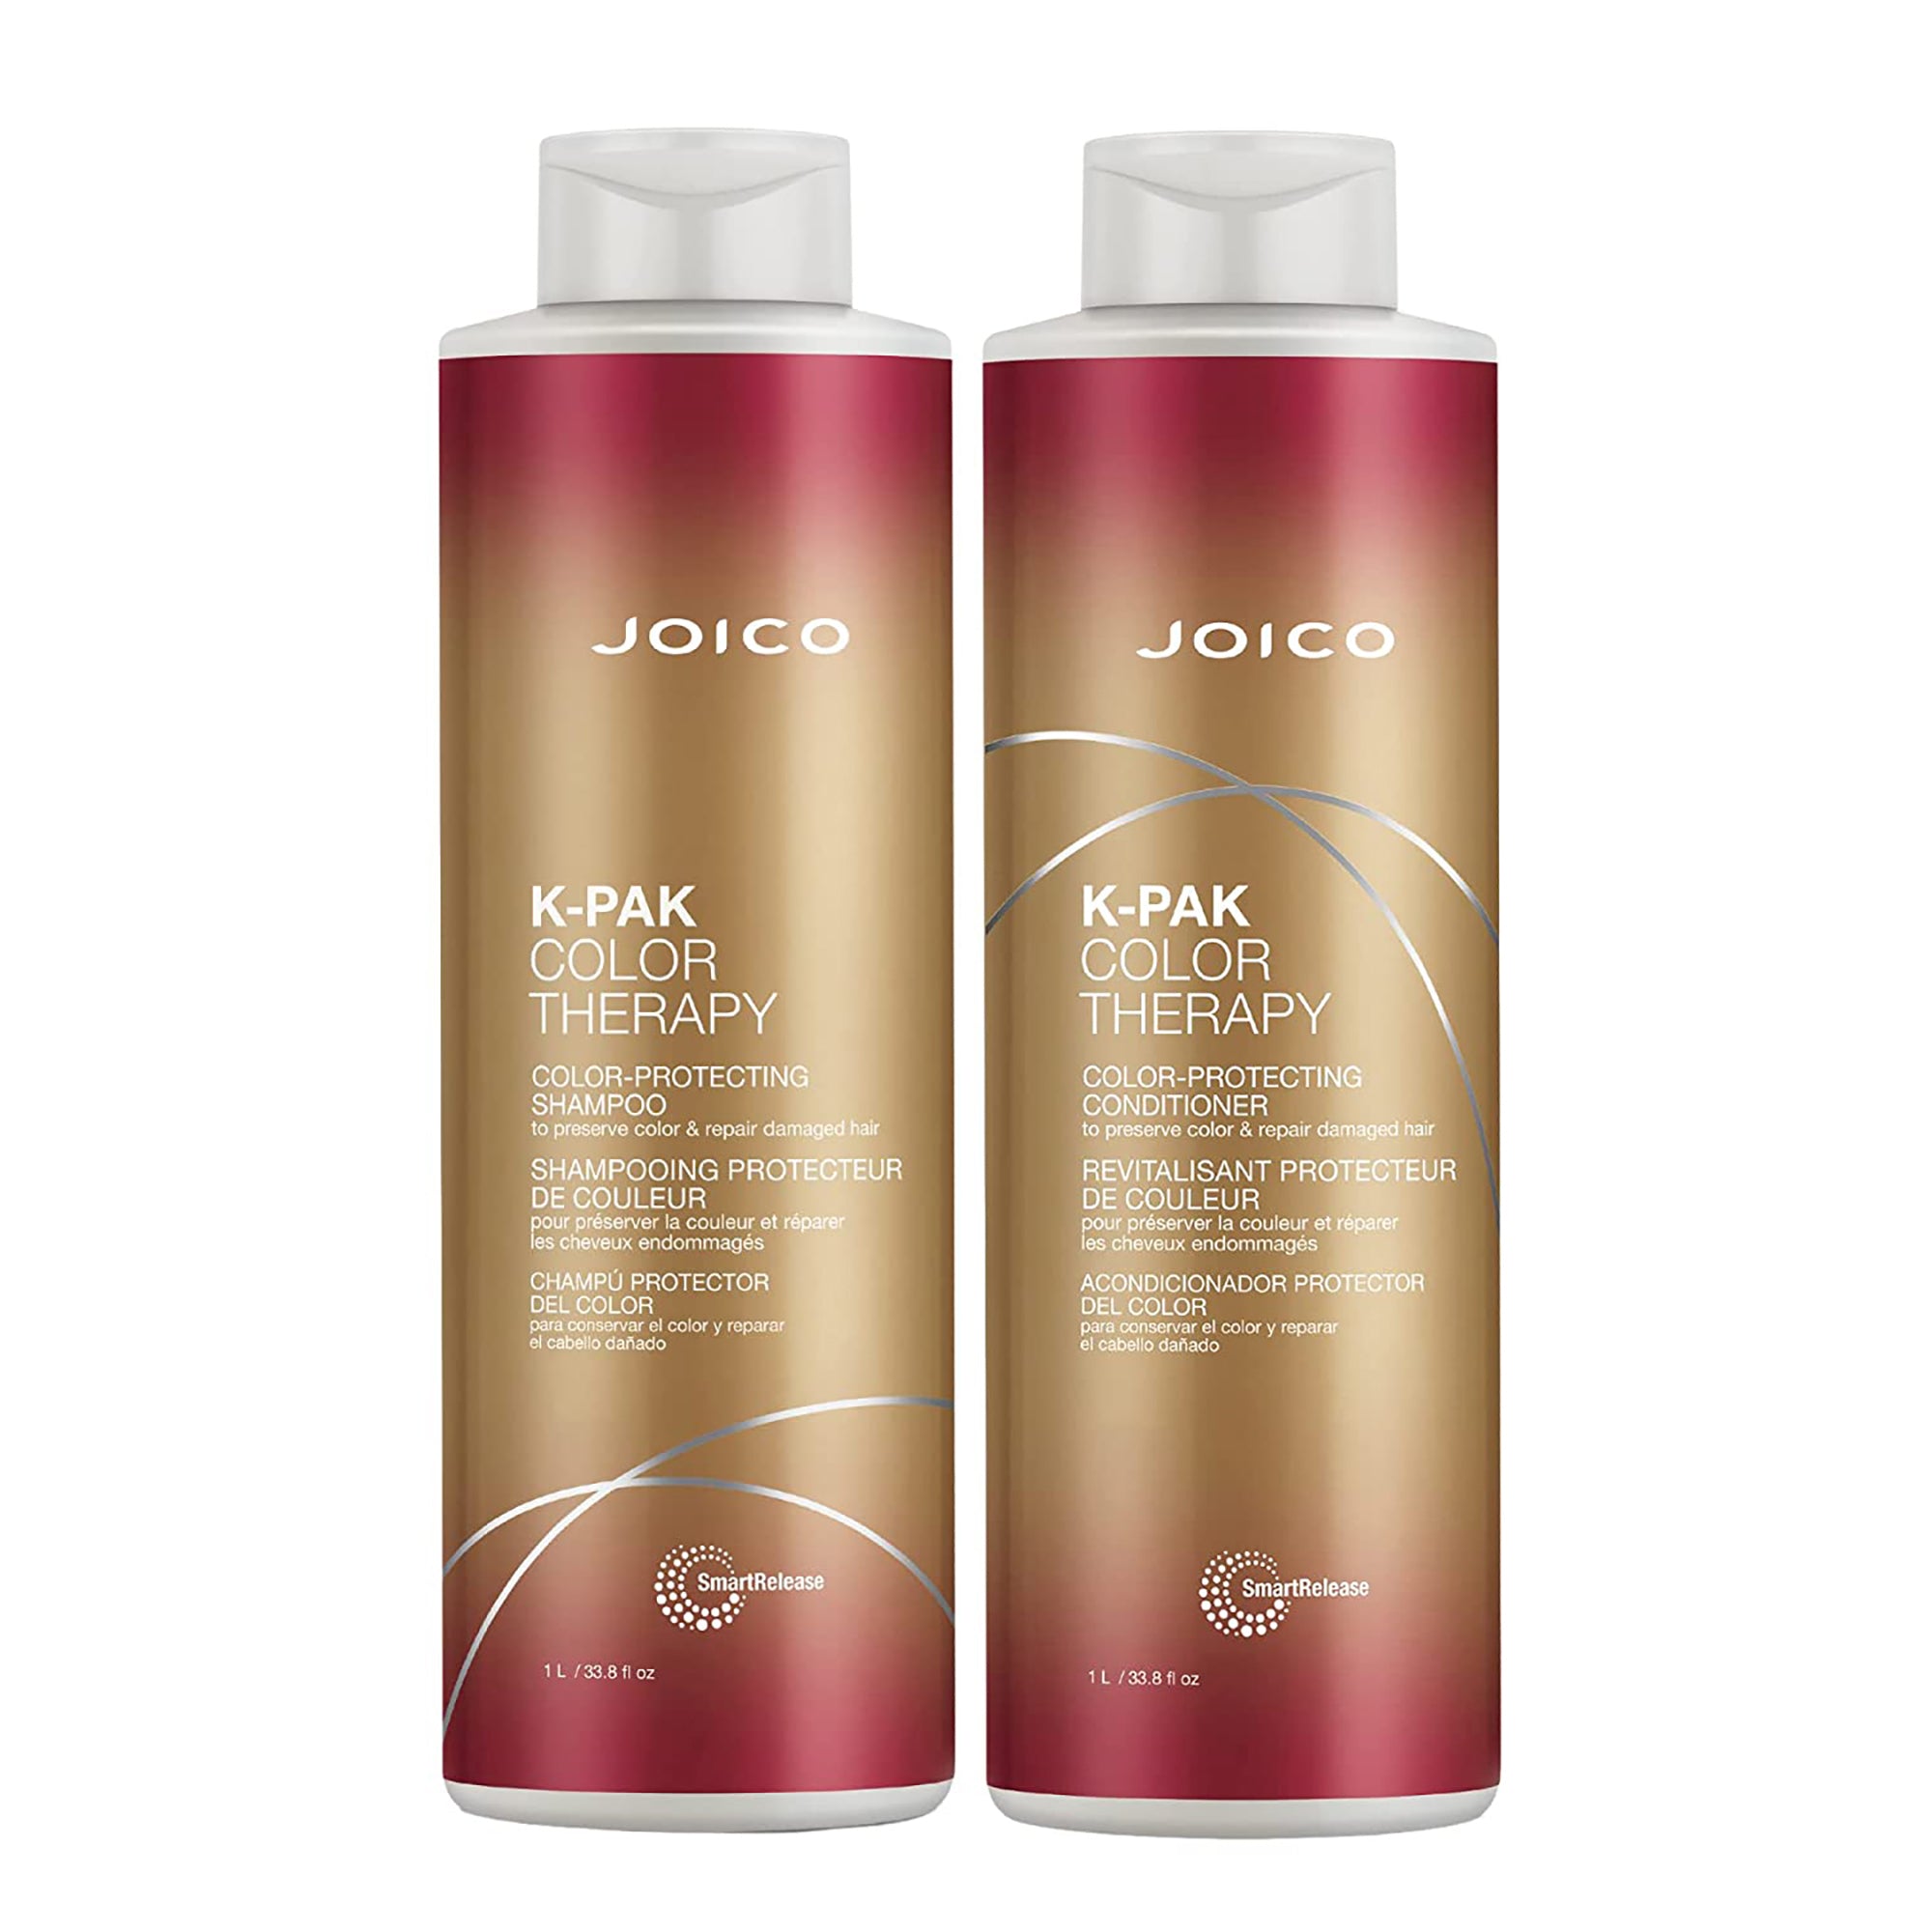 Smitsom sygdom hage Derfor Joico K-Pak Color Therapy Shampoo and - Planet Beauty